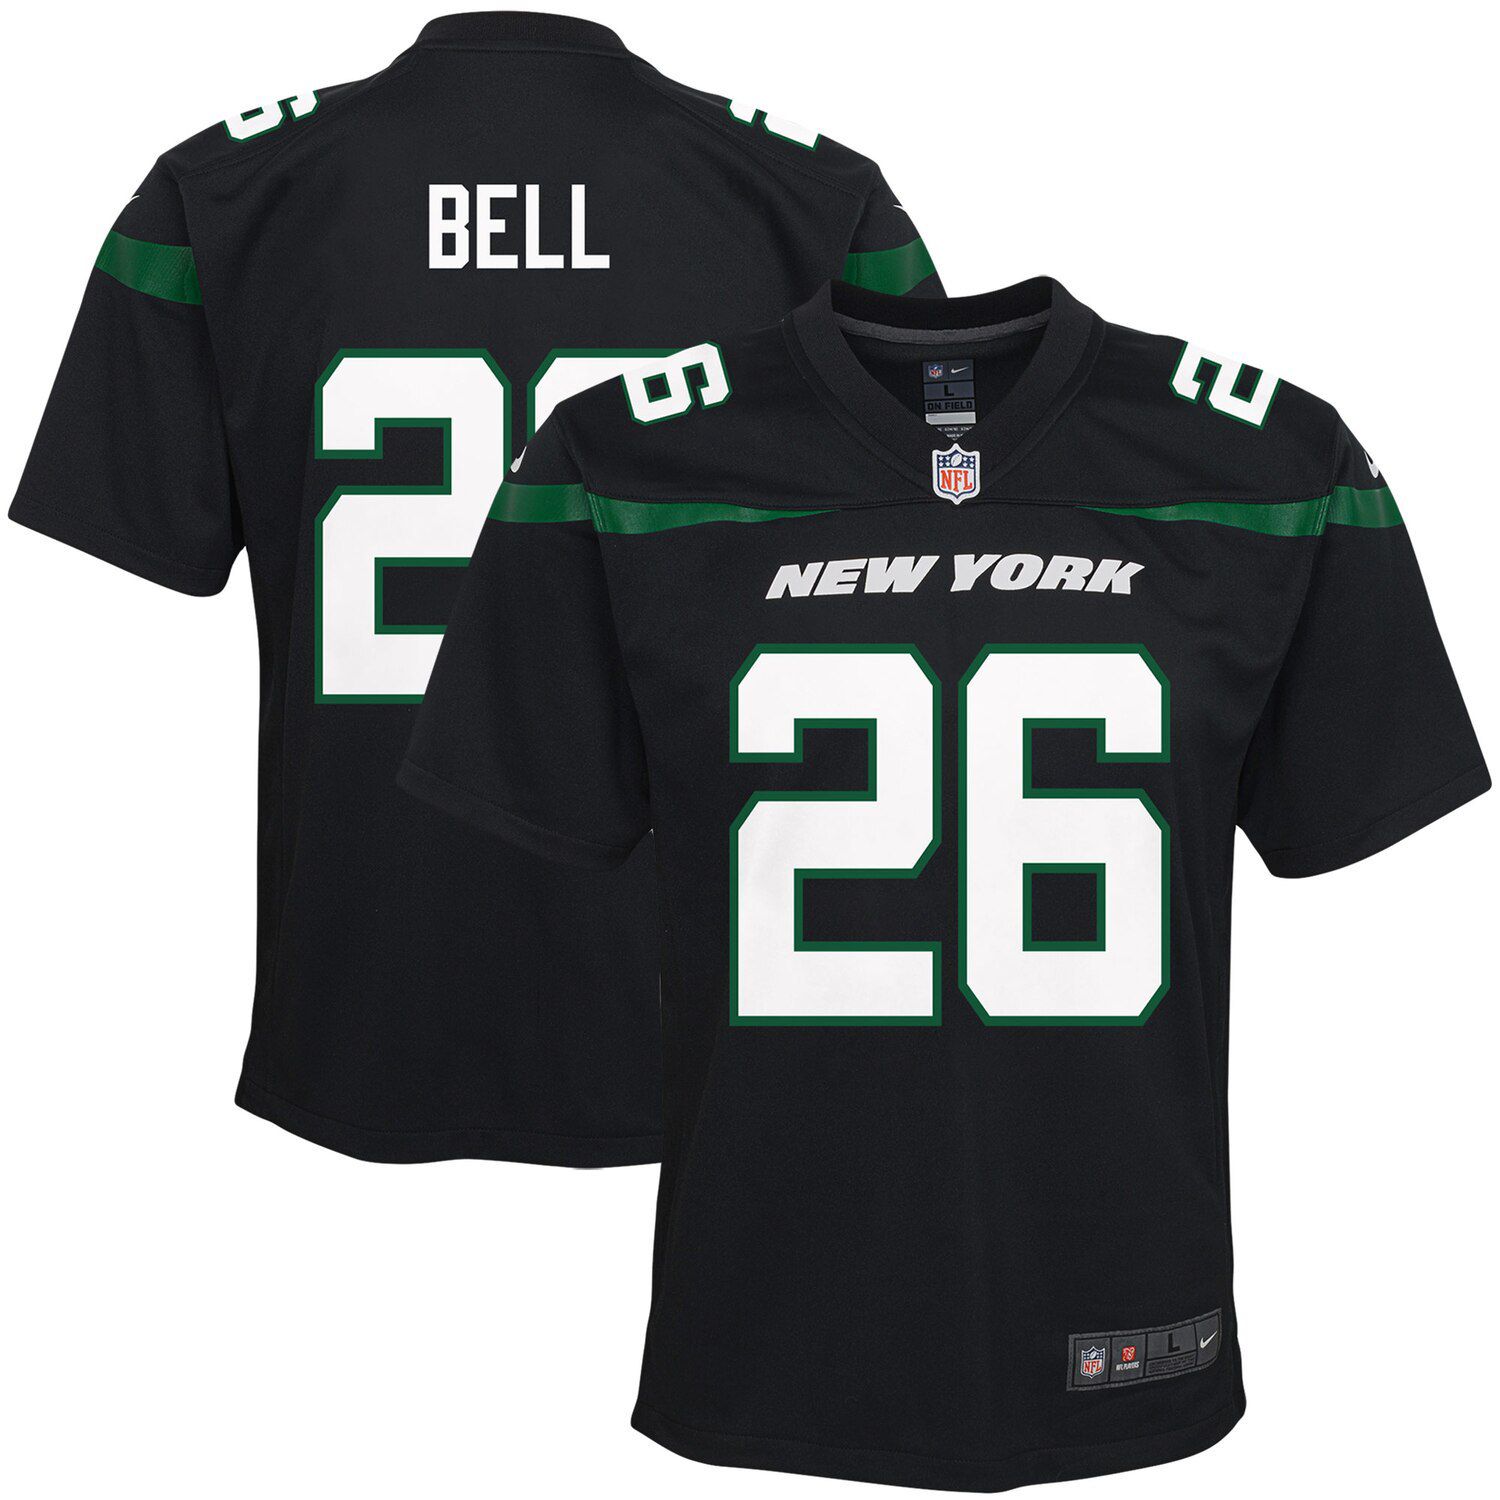 jets jersey bell